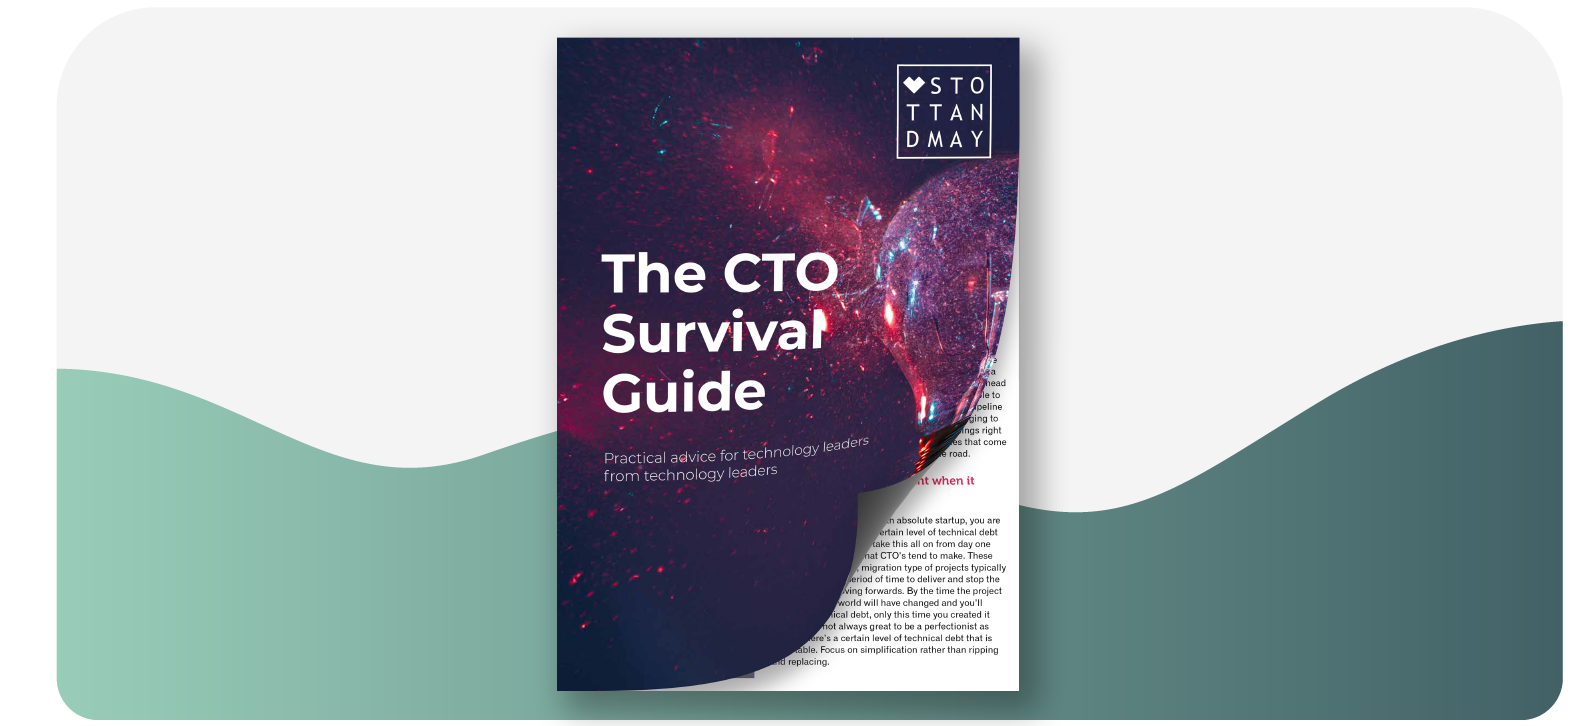 Stott and May CTO Survival Guide